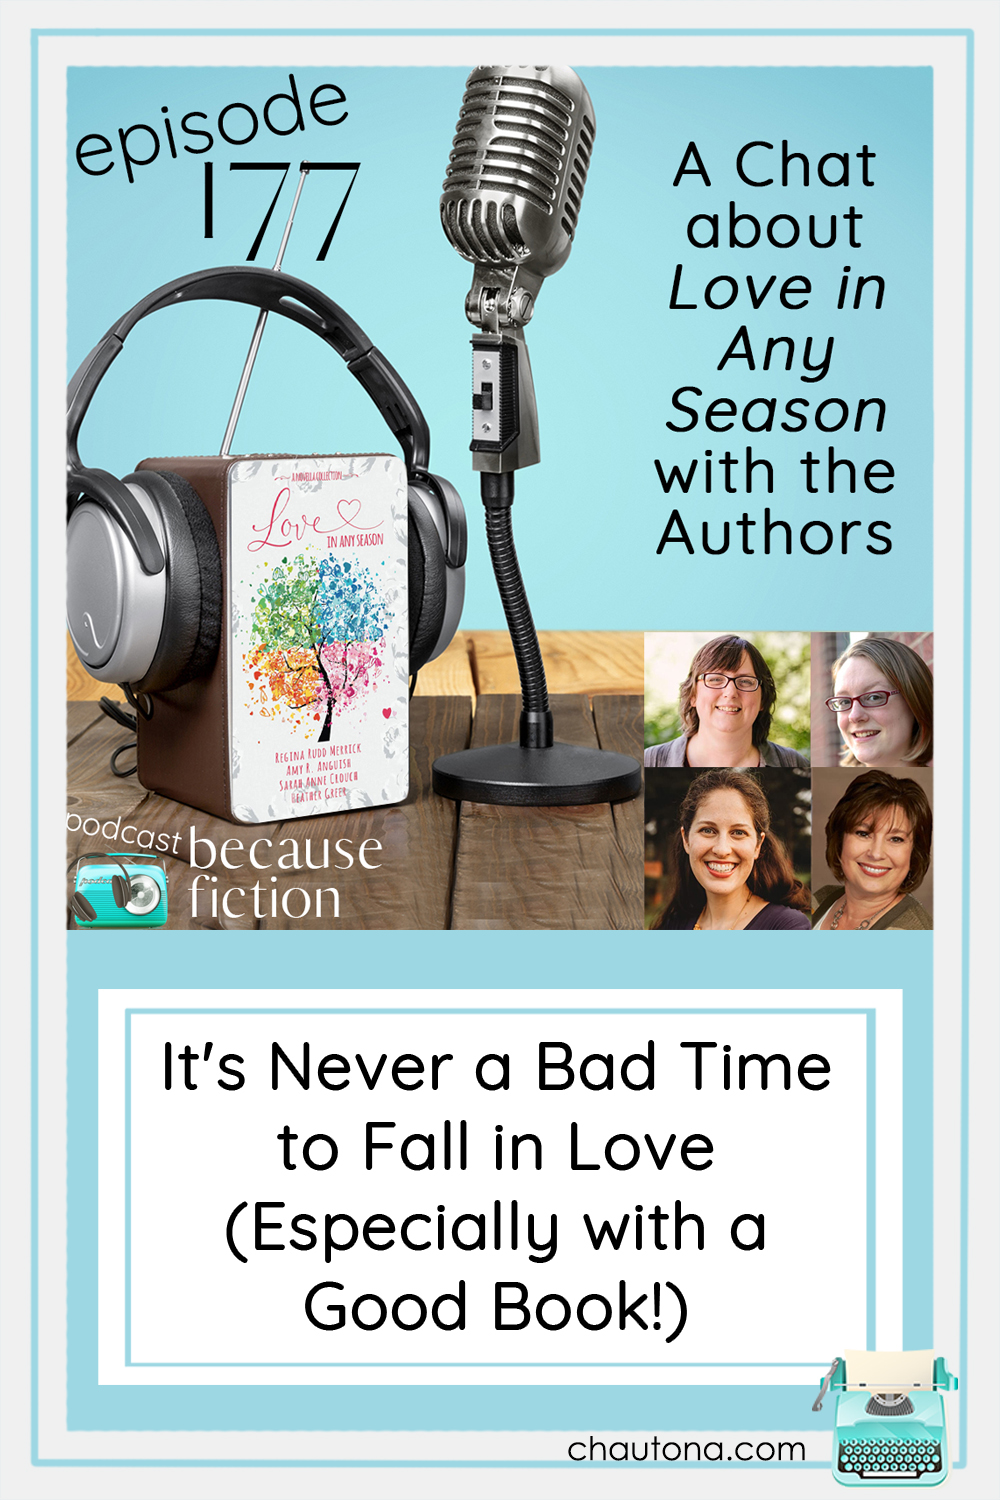 Grab your copy of Love in Any Season, and read this post for the final clue to the scavenger hunt, but time is almost up, so hurry! via @chautonahavig